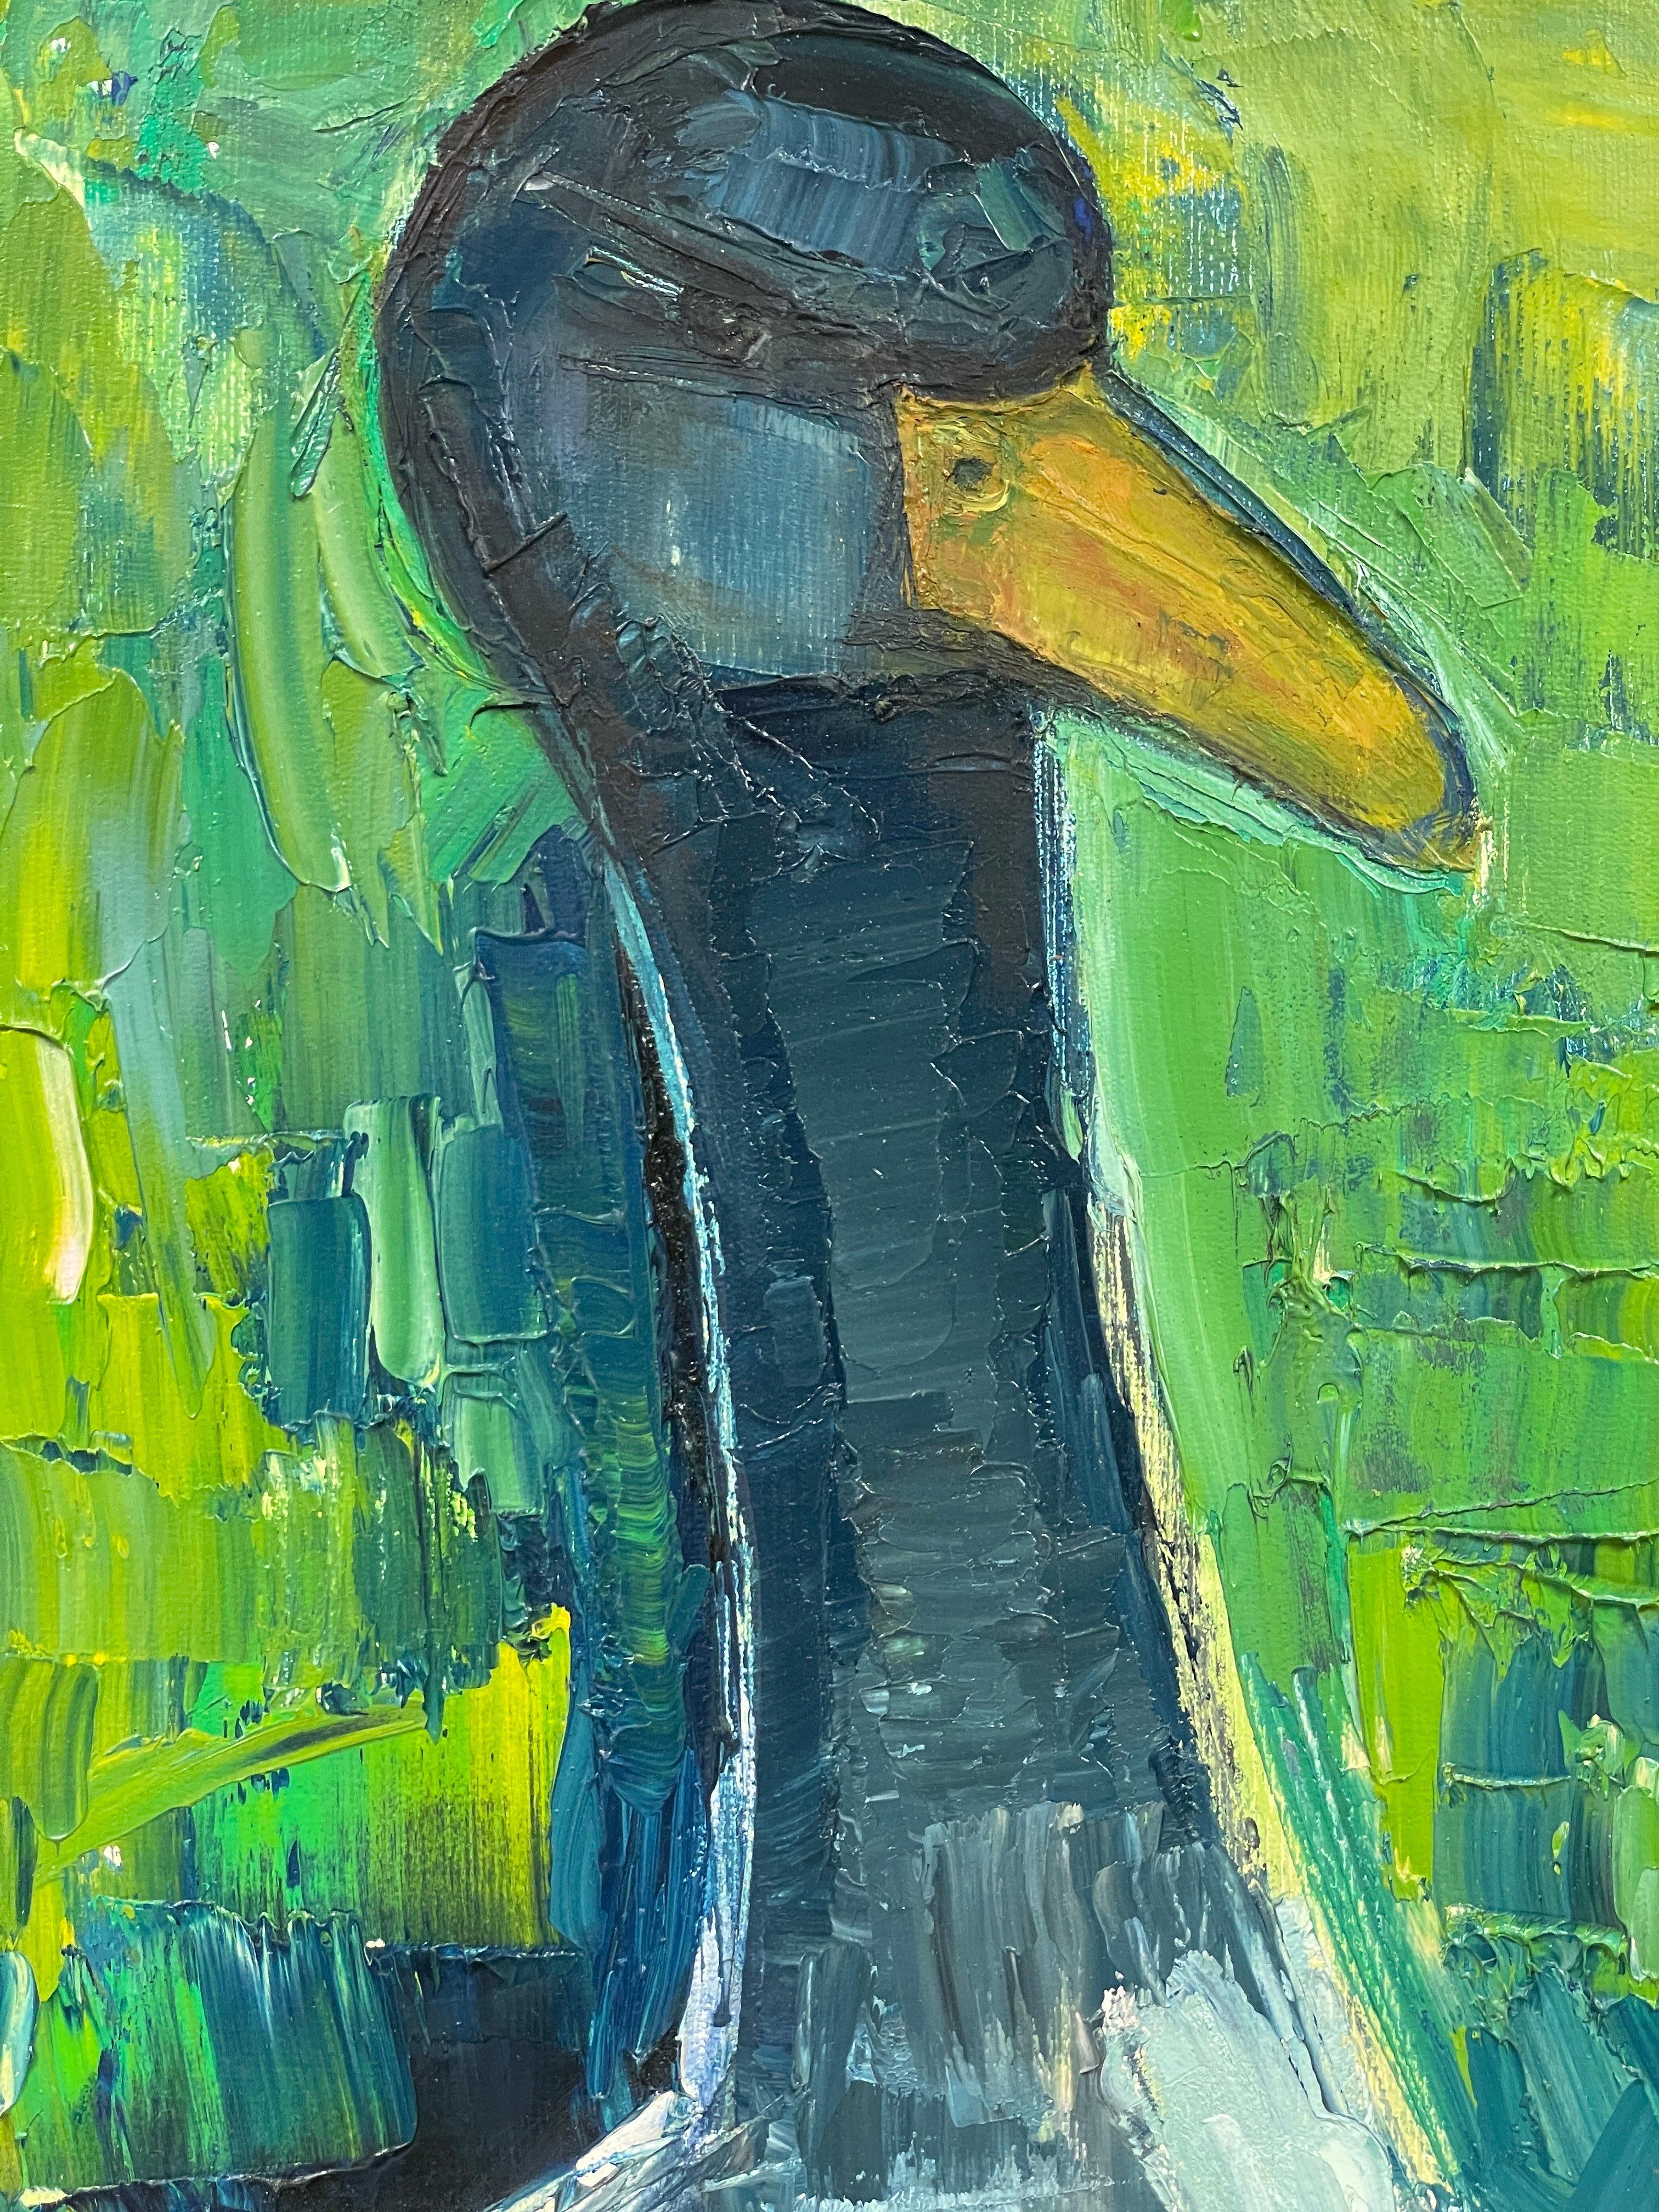 ''Mr Duck''
by Édouard Righetti (1924-2001)

Signed lower front and back

oil painting on canvas, beautifully painted with rick thick impasto oil and bold colors. 
very good condition
In wooden frame
size: 29 inches x 20.5 inches

provenance: all